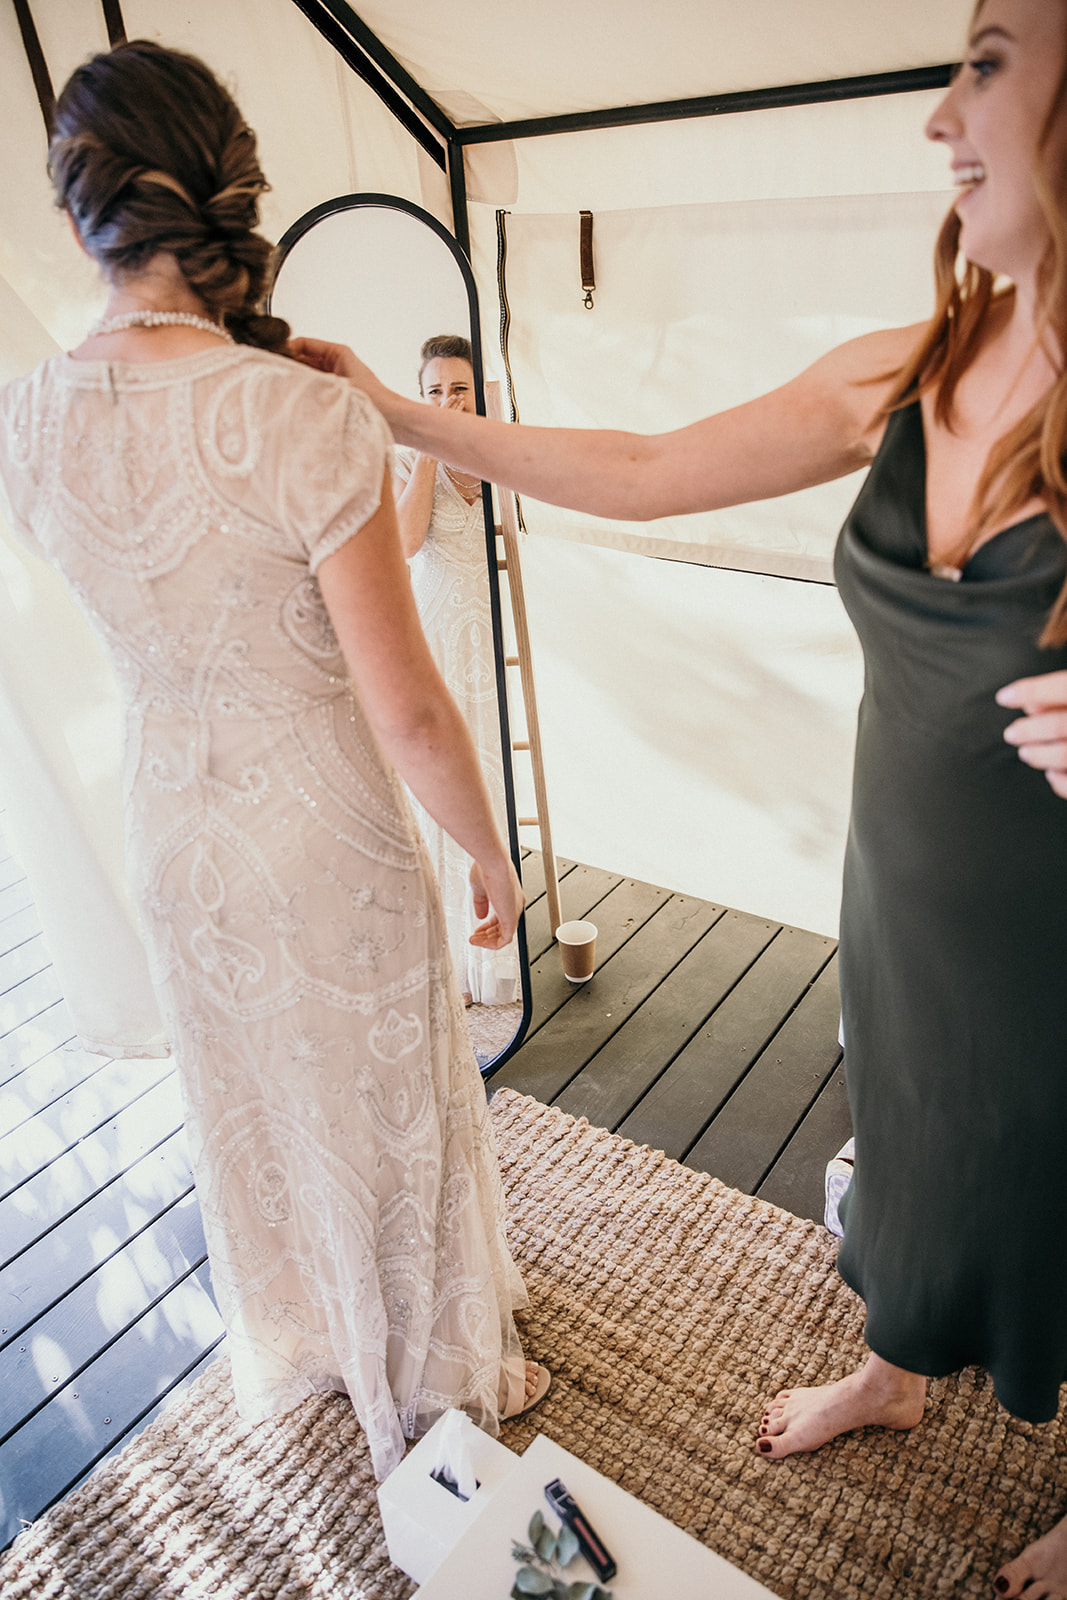  The bride becomes emotional when she sees her hair and makeup and her dress on at the same time.  